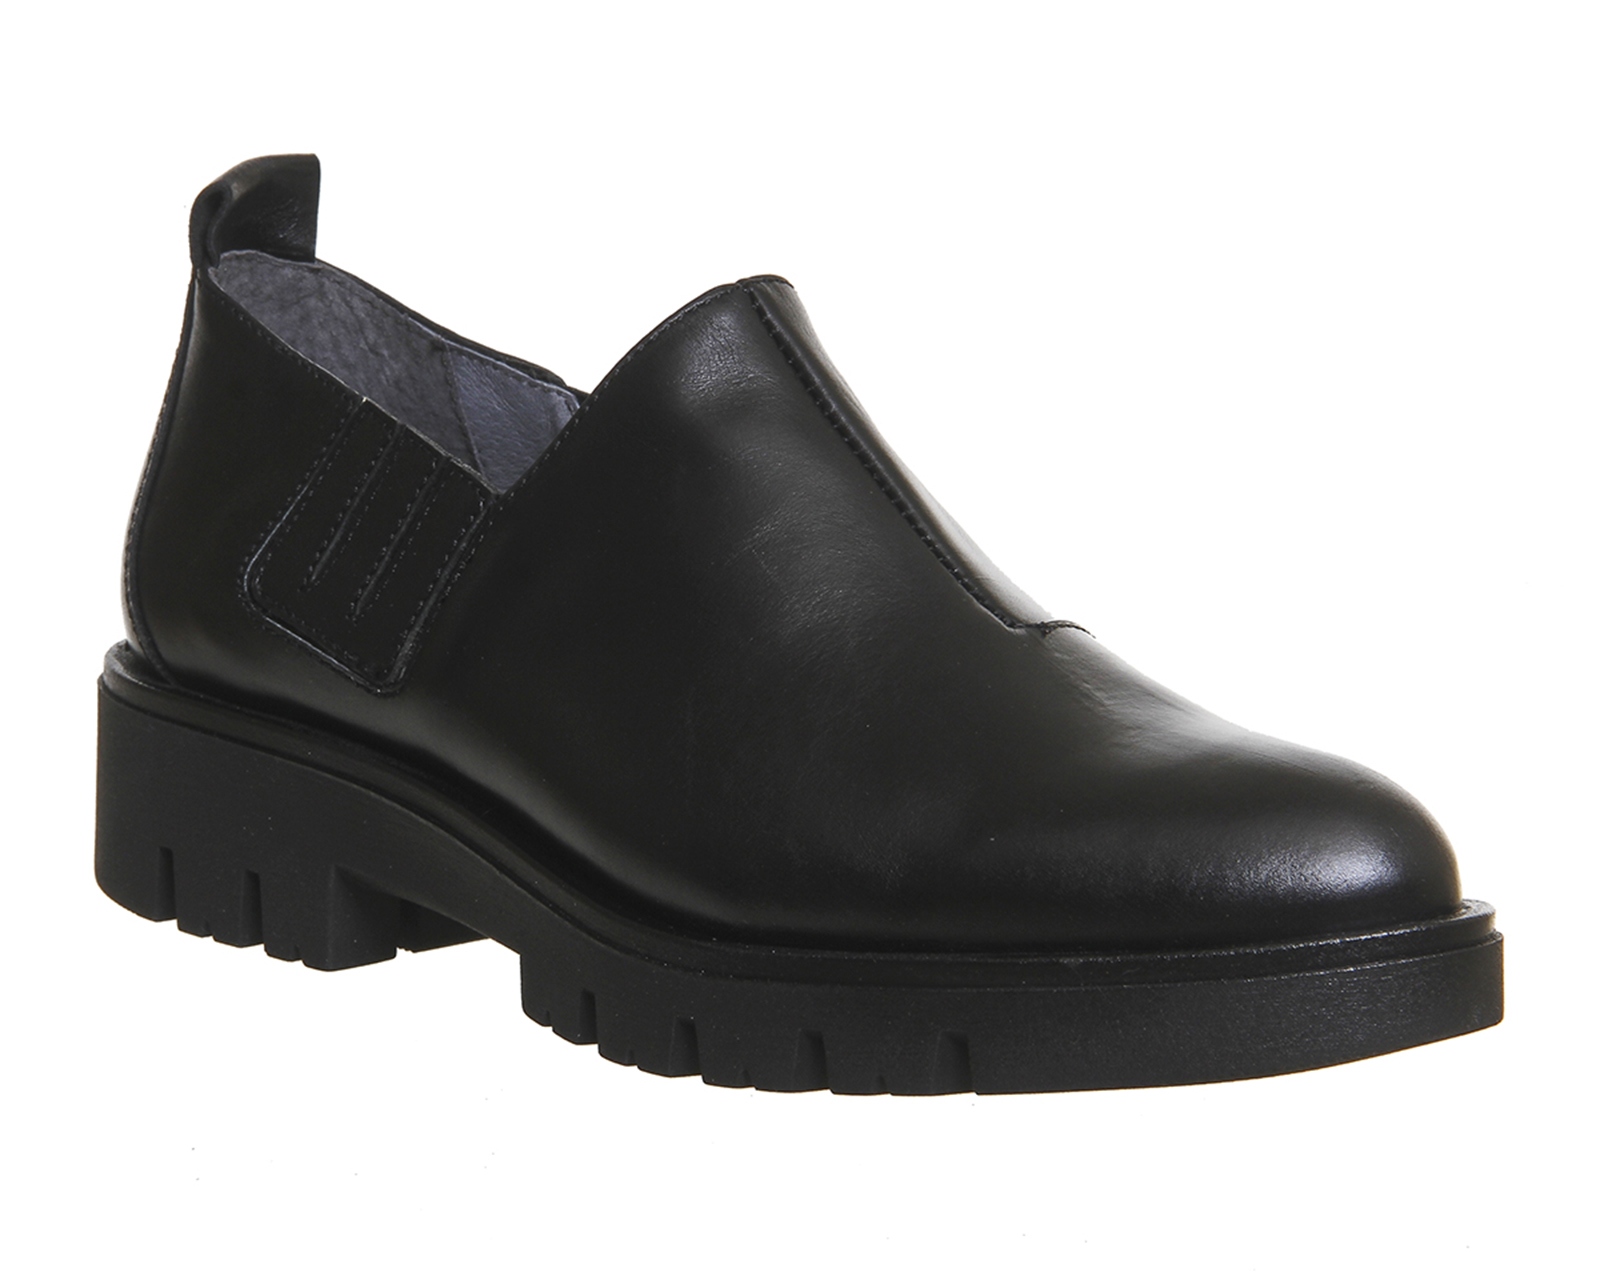 Gaimo for OFFICEMia Slip On ShoesBlack Leather